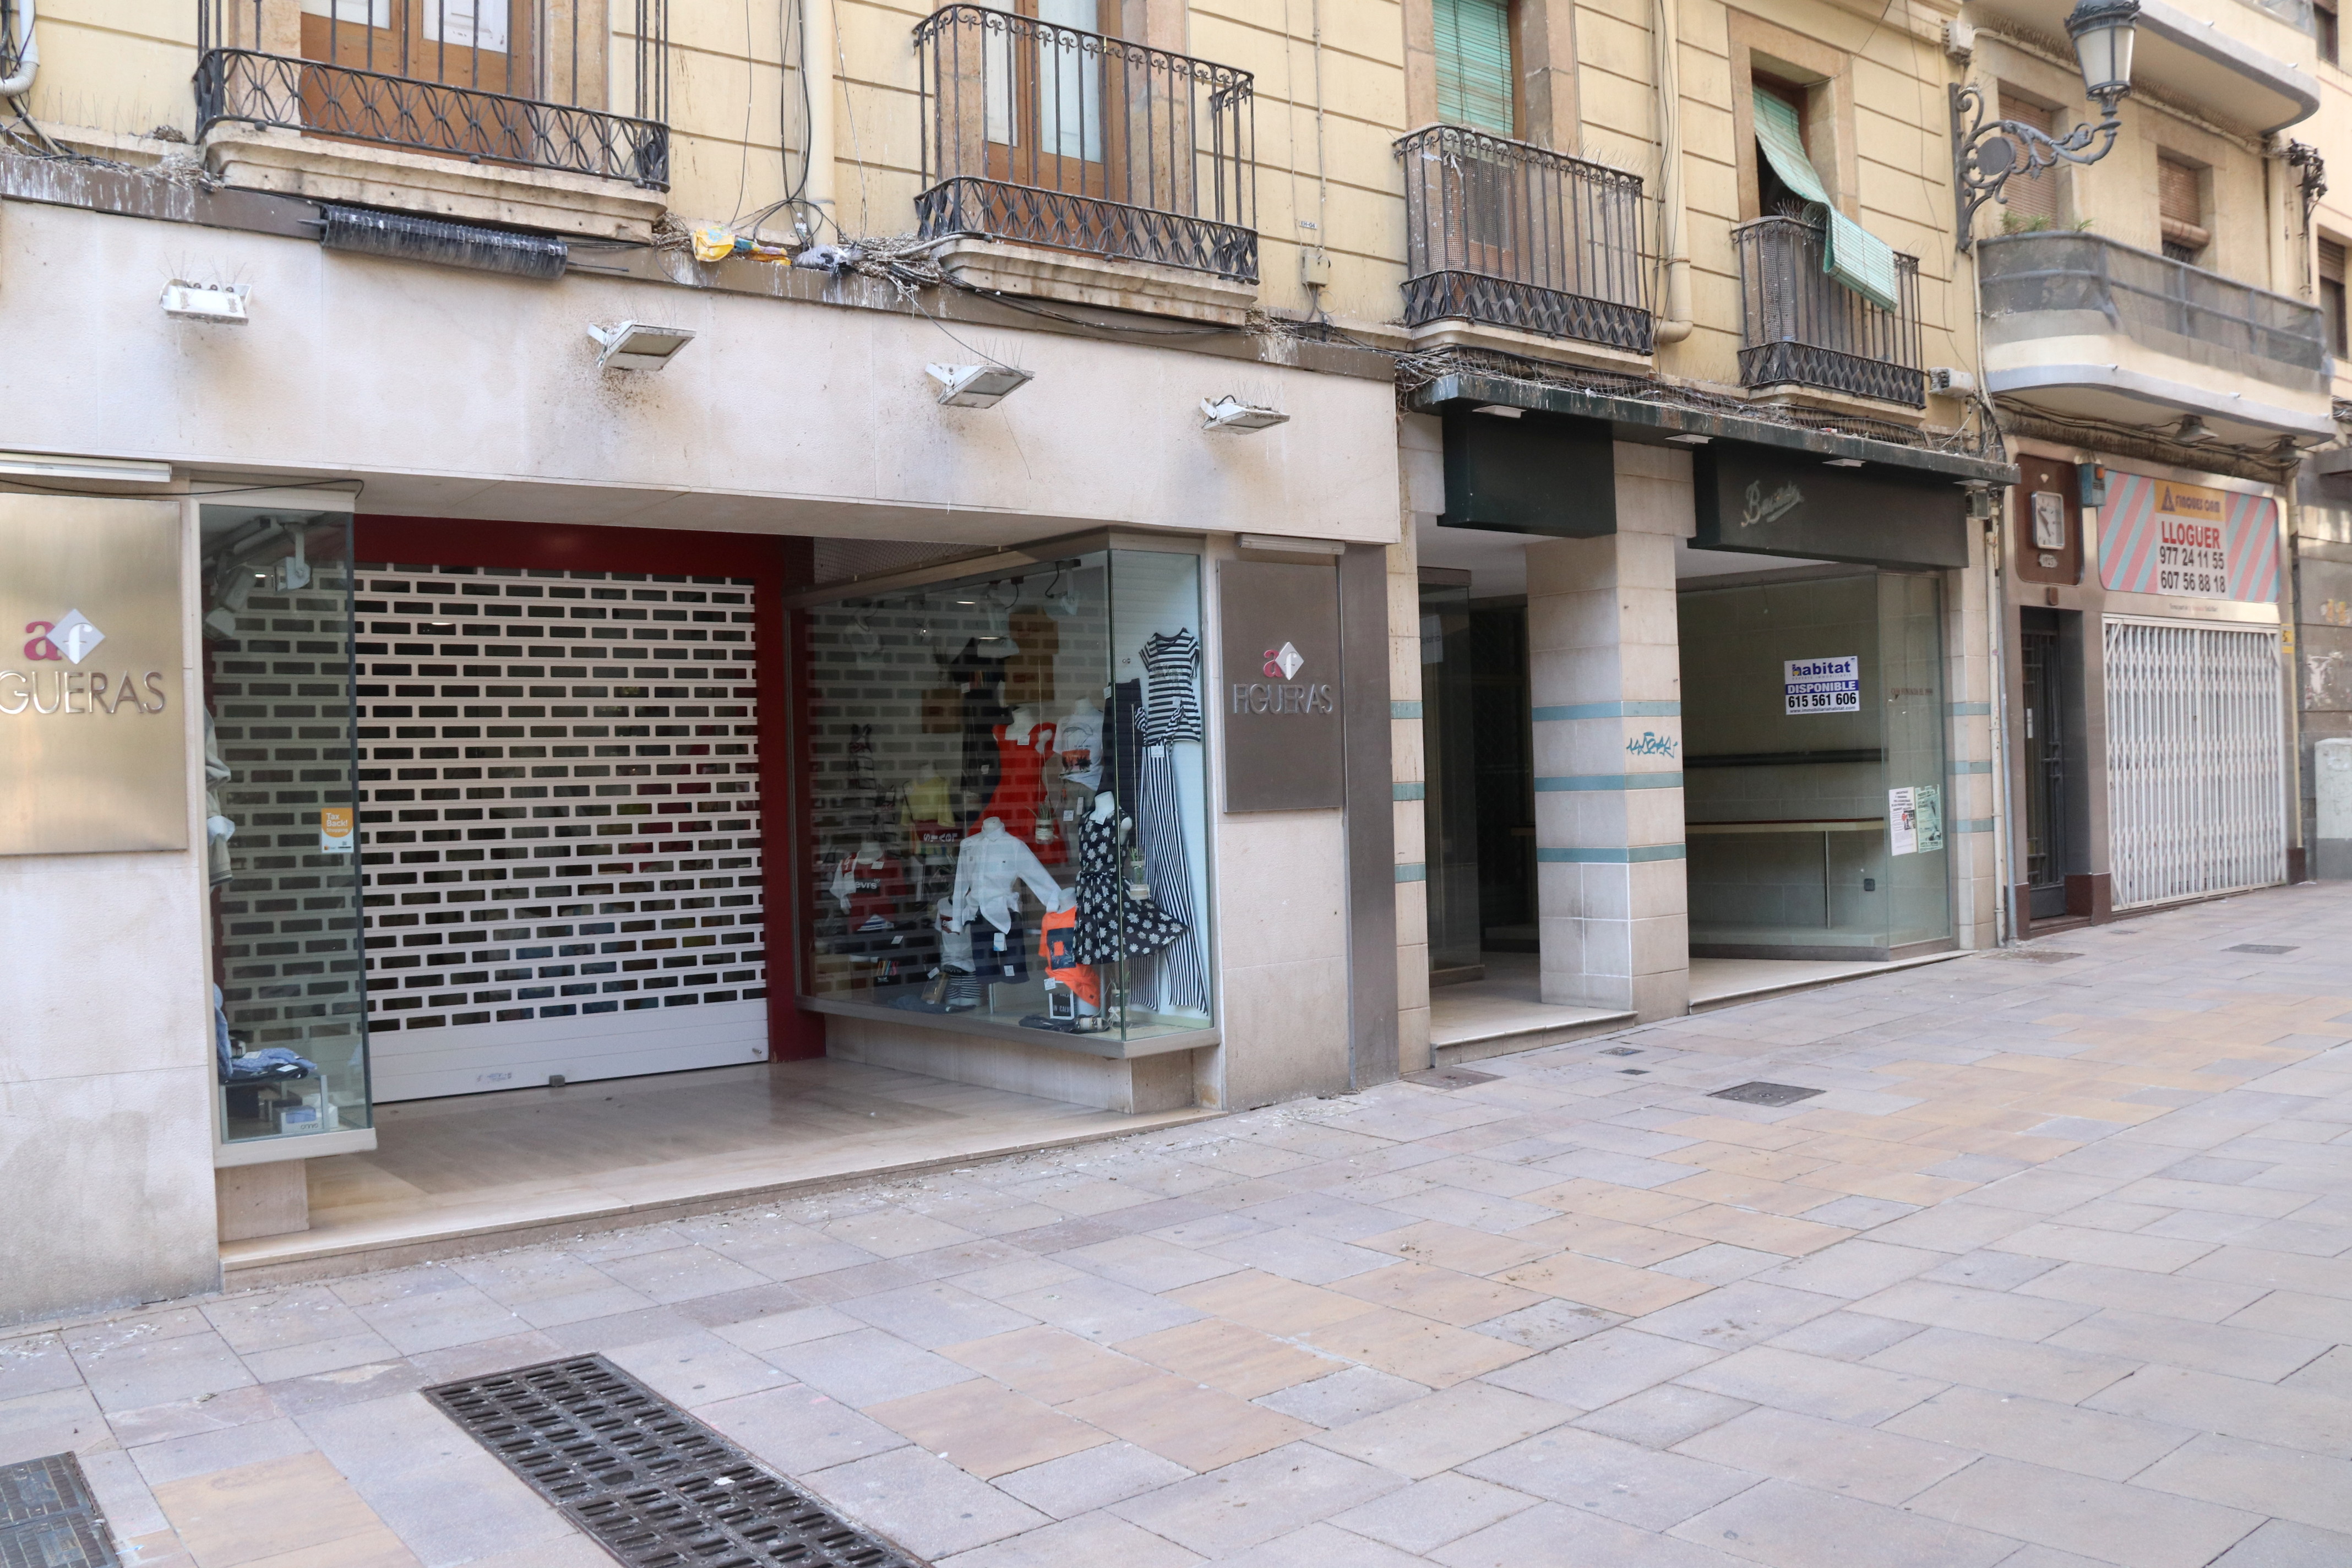 Closed shops and businesses in Tarragona due to the coronavirus pandemic (by Eloi Tost)